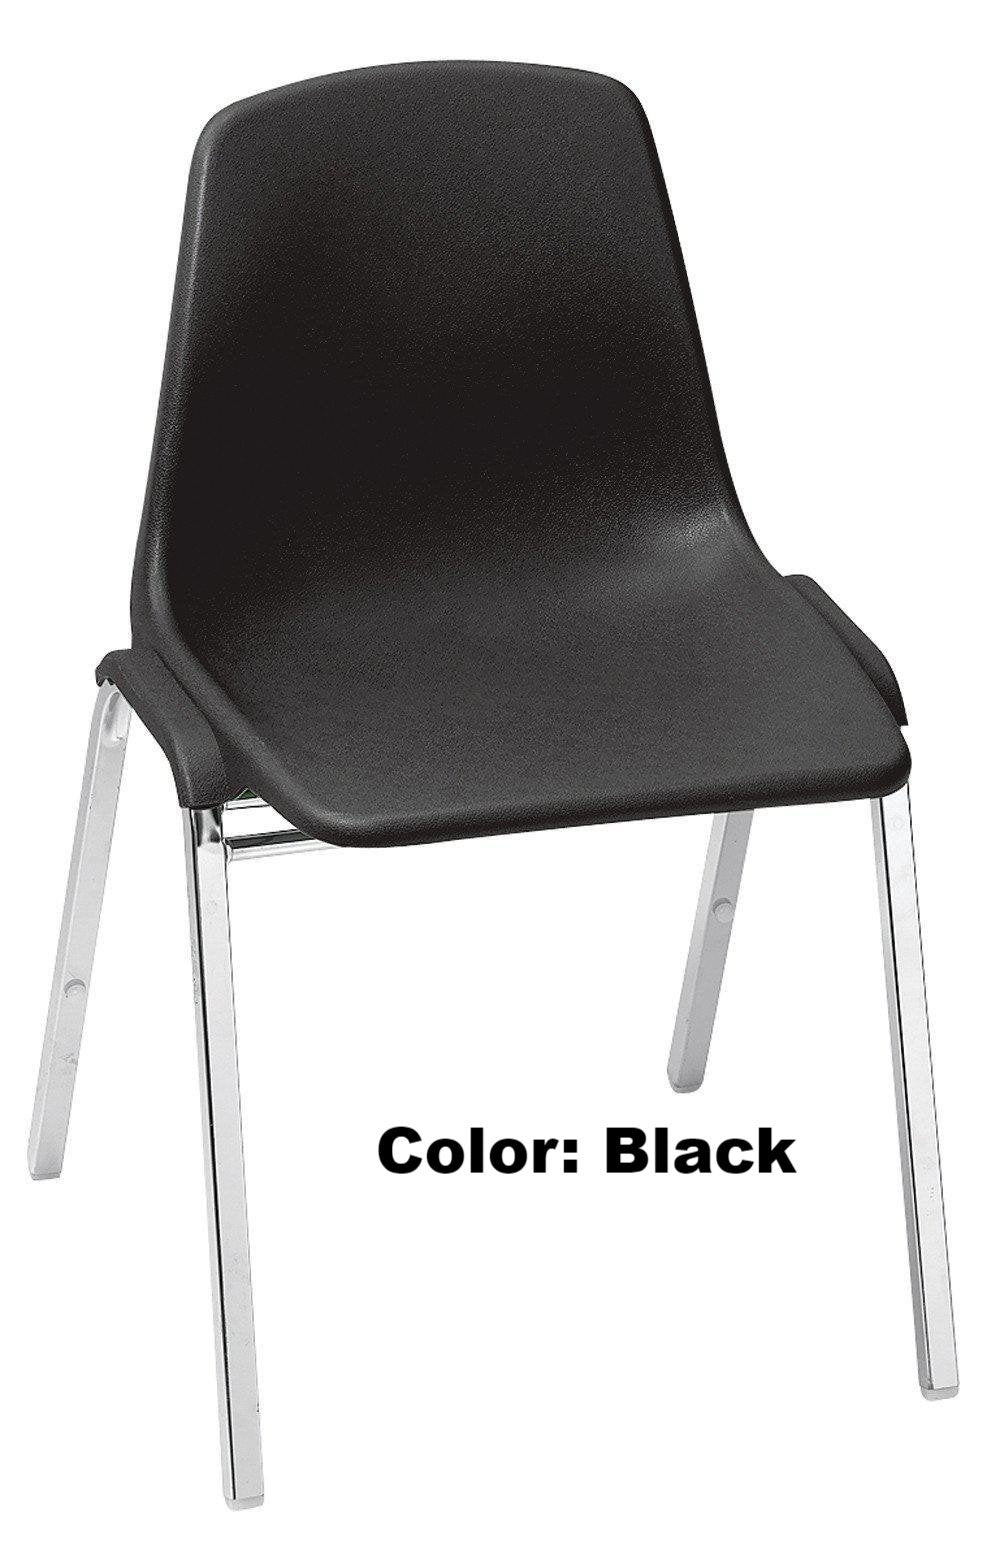 Banquet Chair Model 8100 Series Poly Shell Stacking